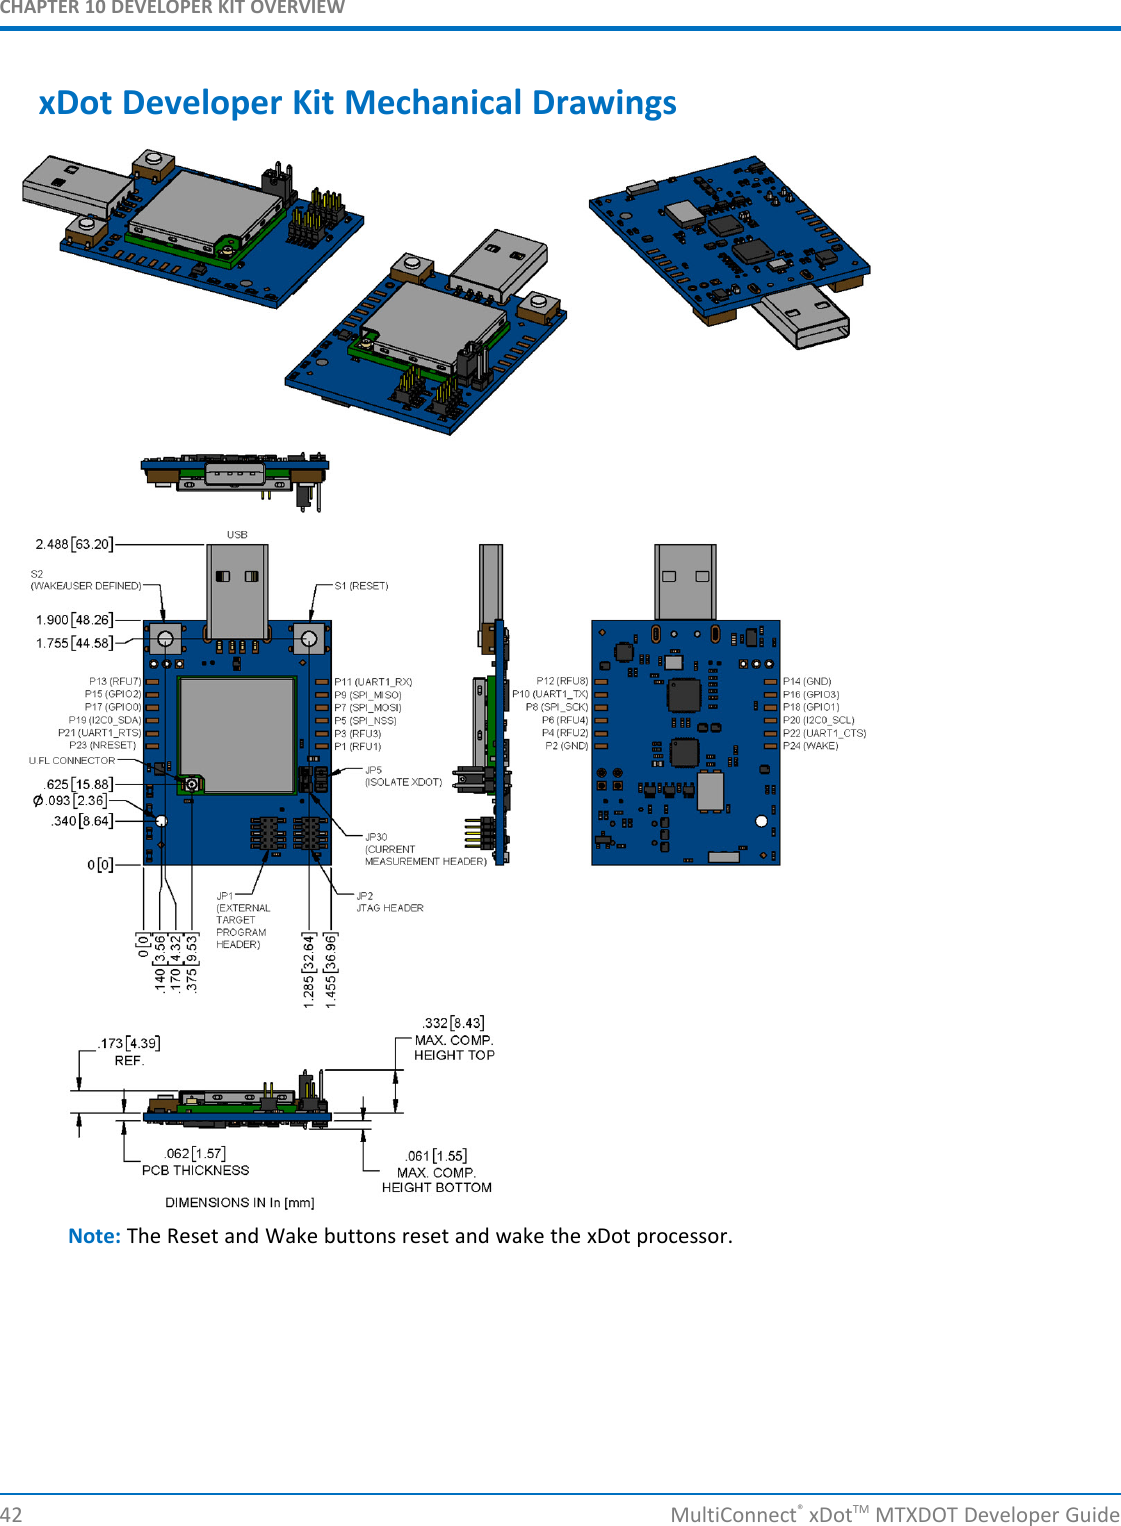 CHAPTER 10 DEVELOPER KIT OVERVIEW42 MultiConnect®xDotTM MTXDOT Developer GuidexDot Developer Kit Mechanical DrawingsNote: The Reset and Wake buttons reset and wake the xDot processor.